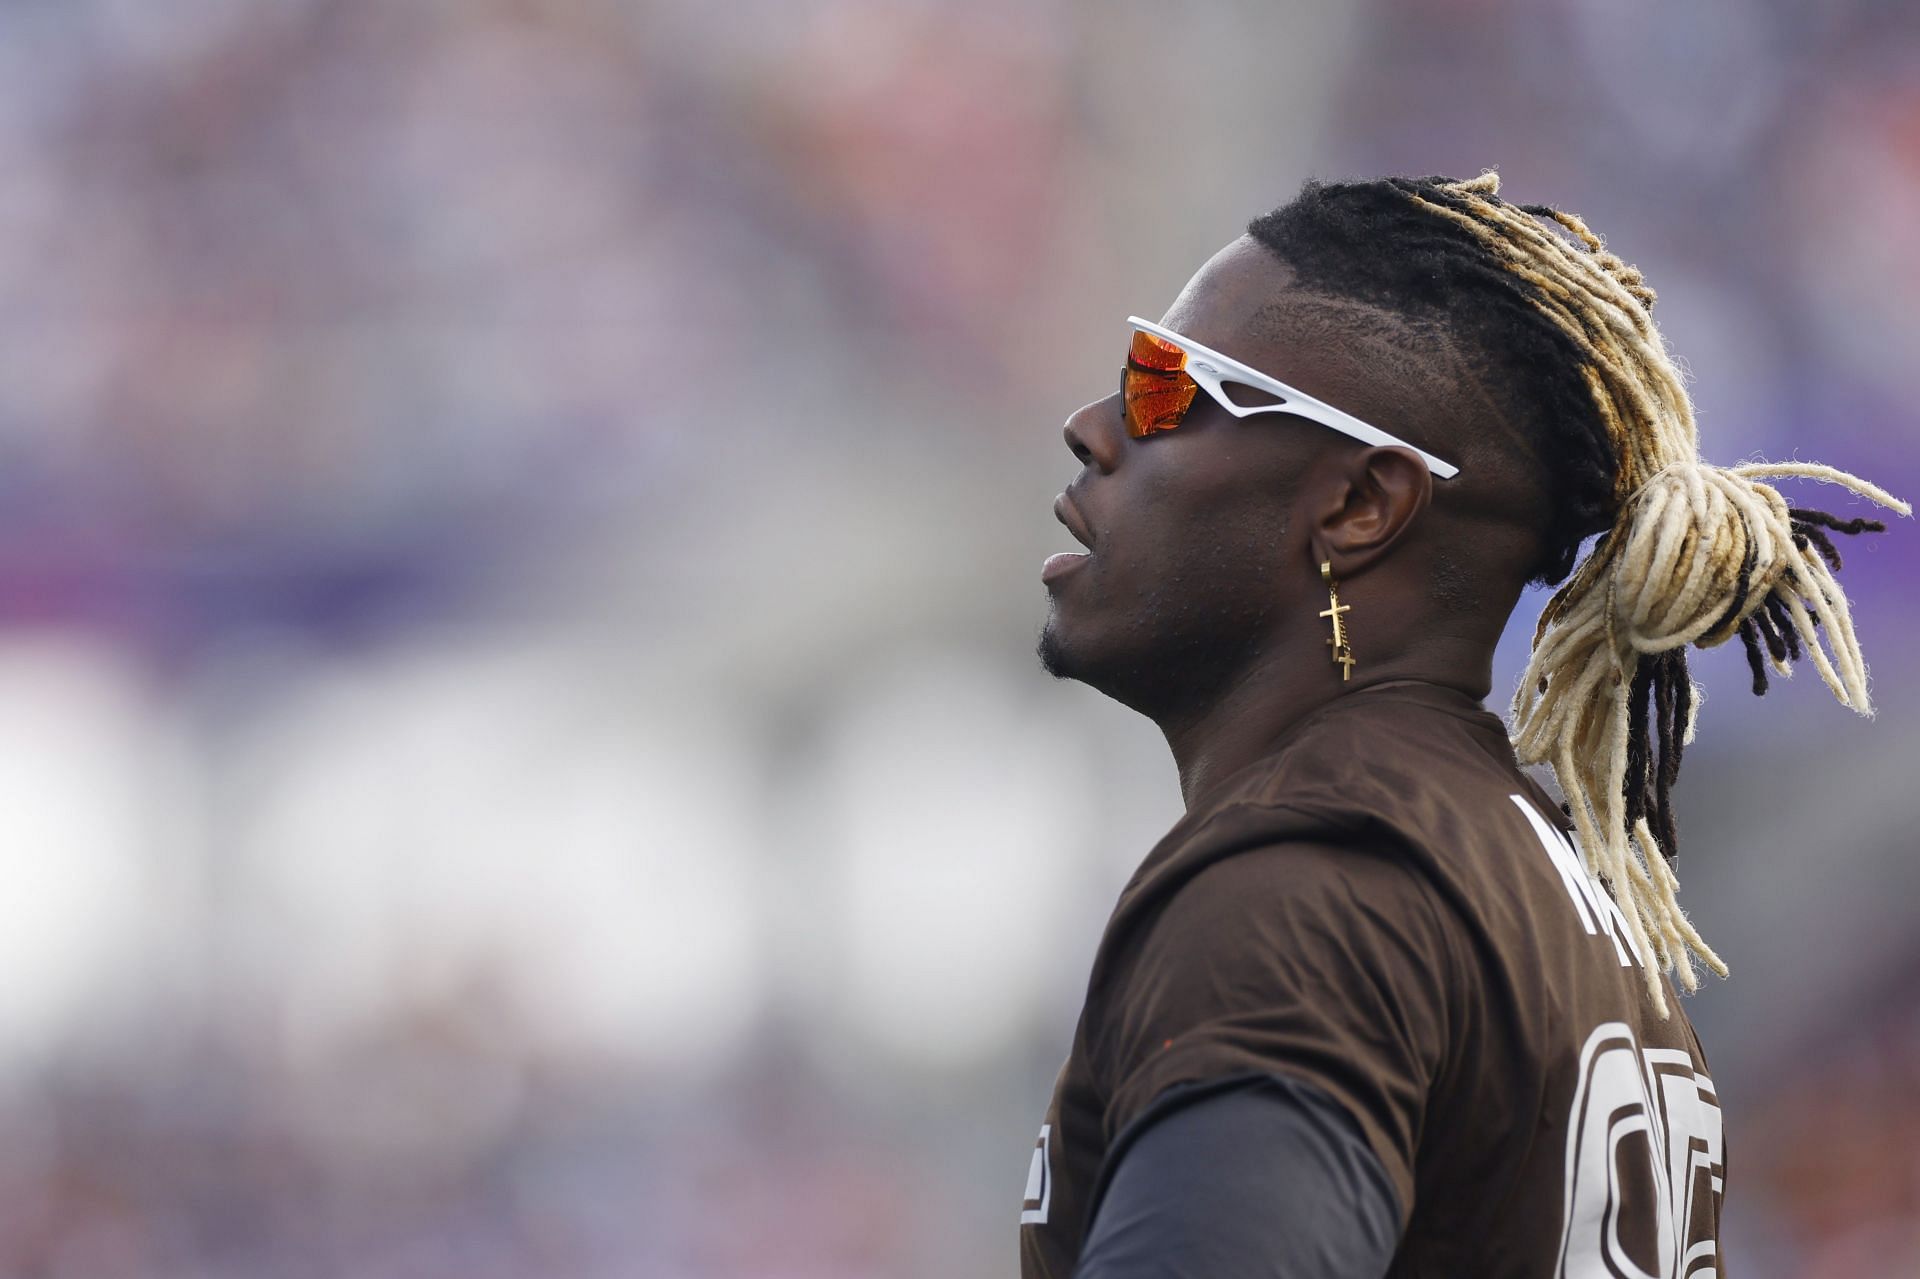 “I just can’t stand them”: Browns star David Njoku names the one AFC team he hates the most